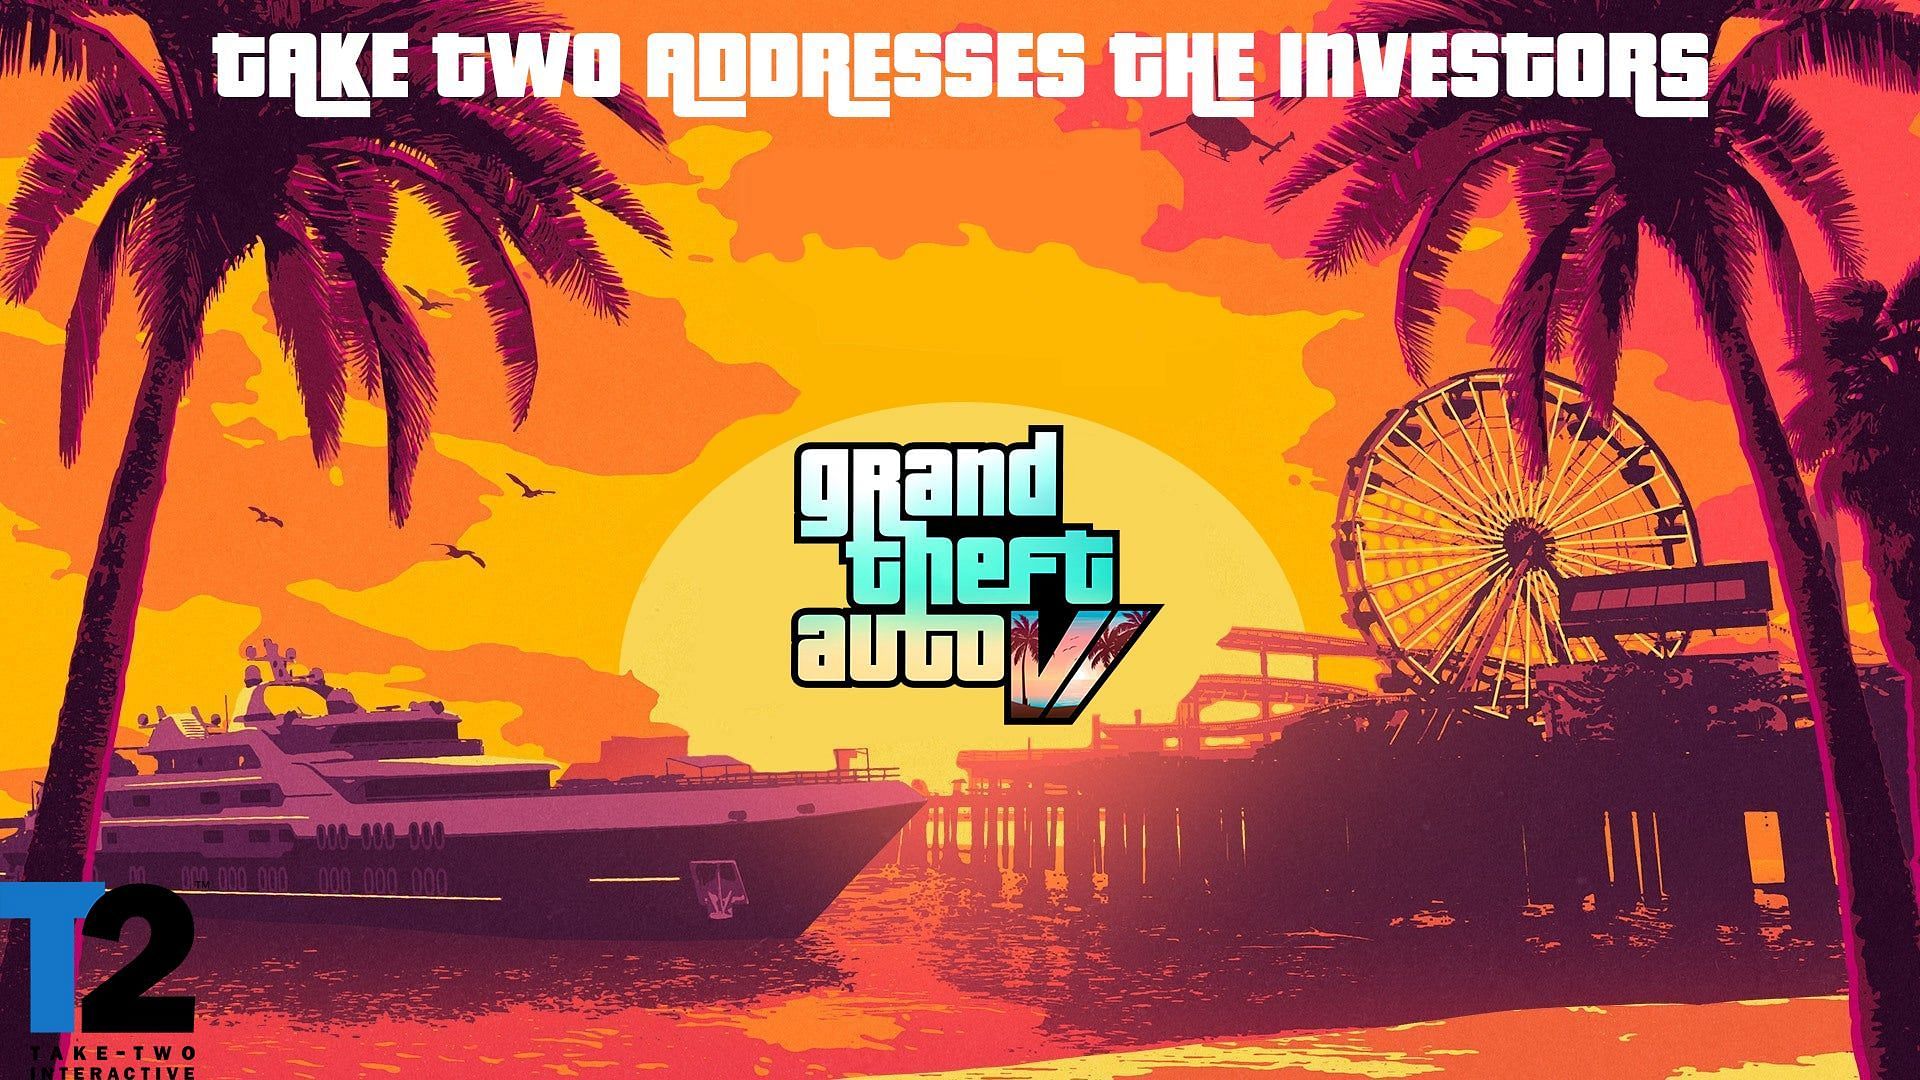 The GTA 6 leaks have ruffled Take Two Interactive